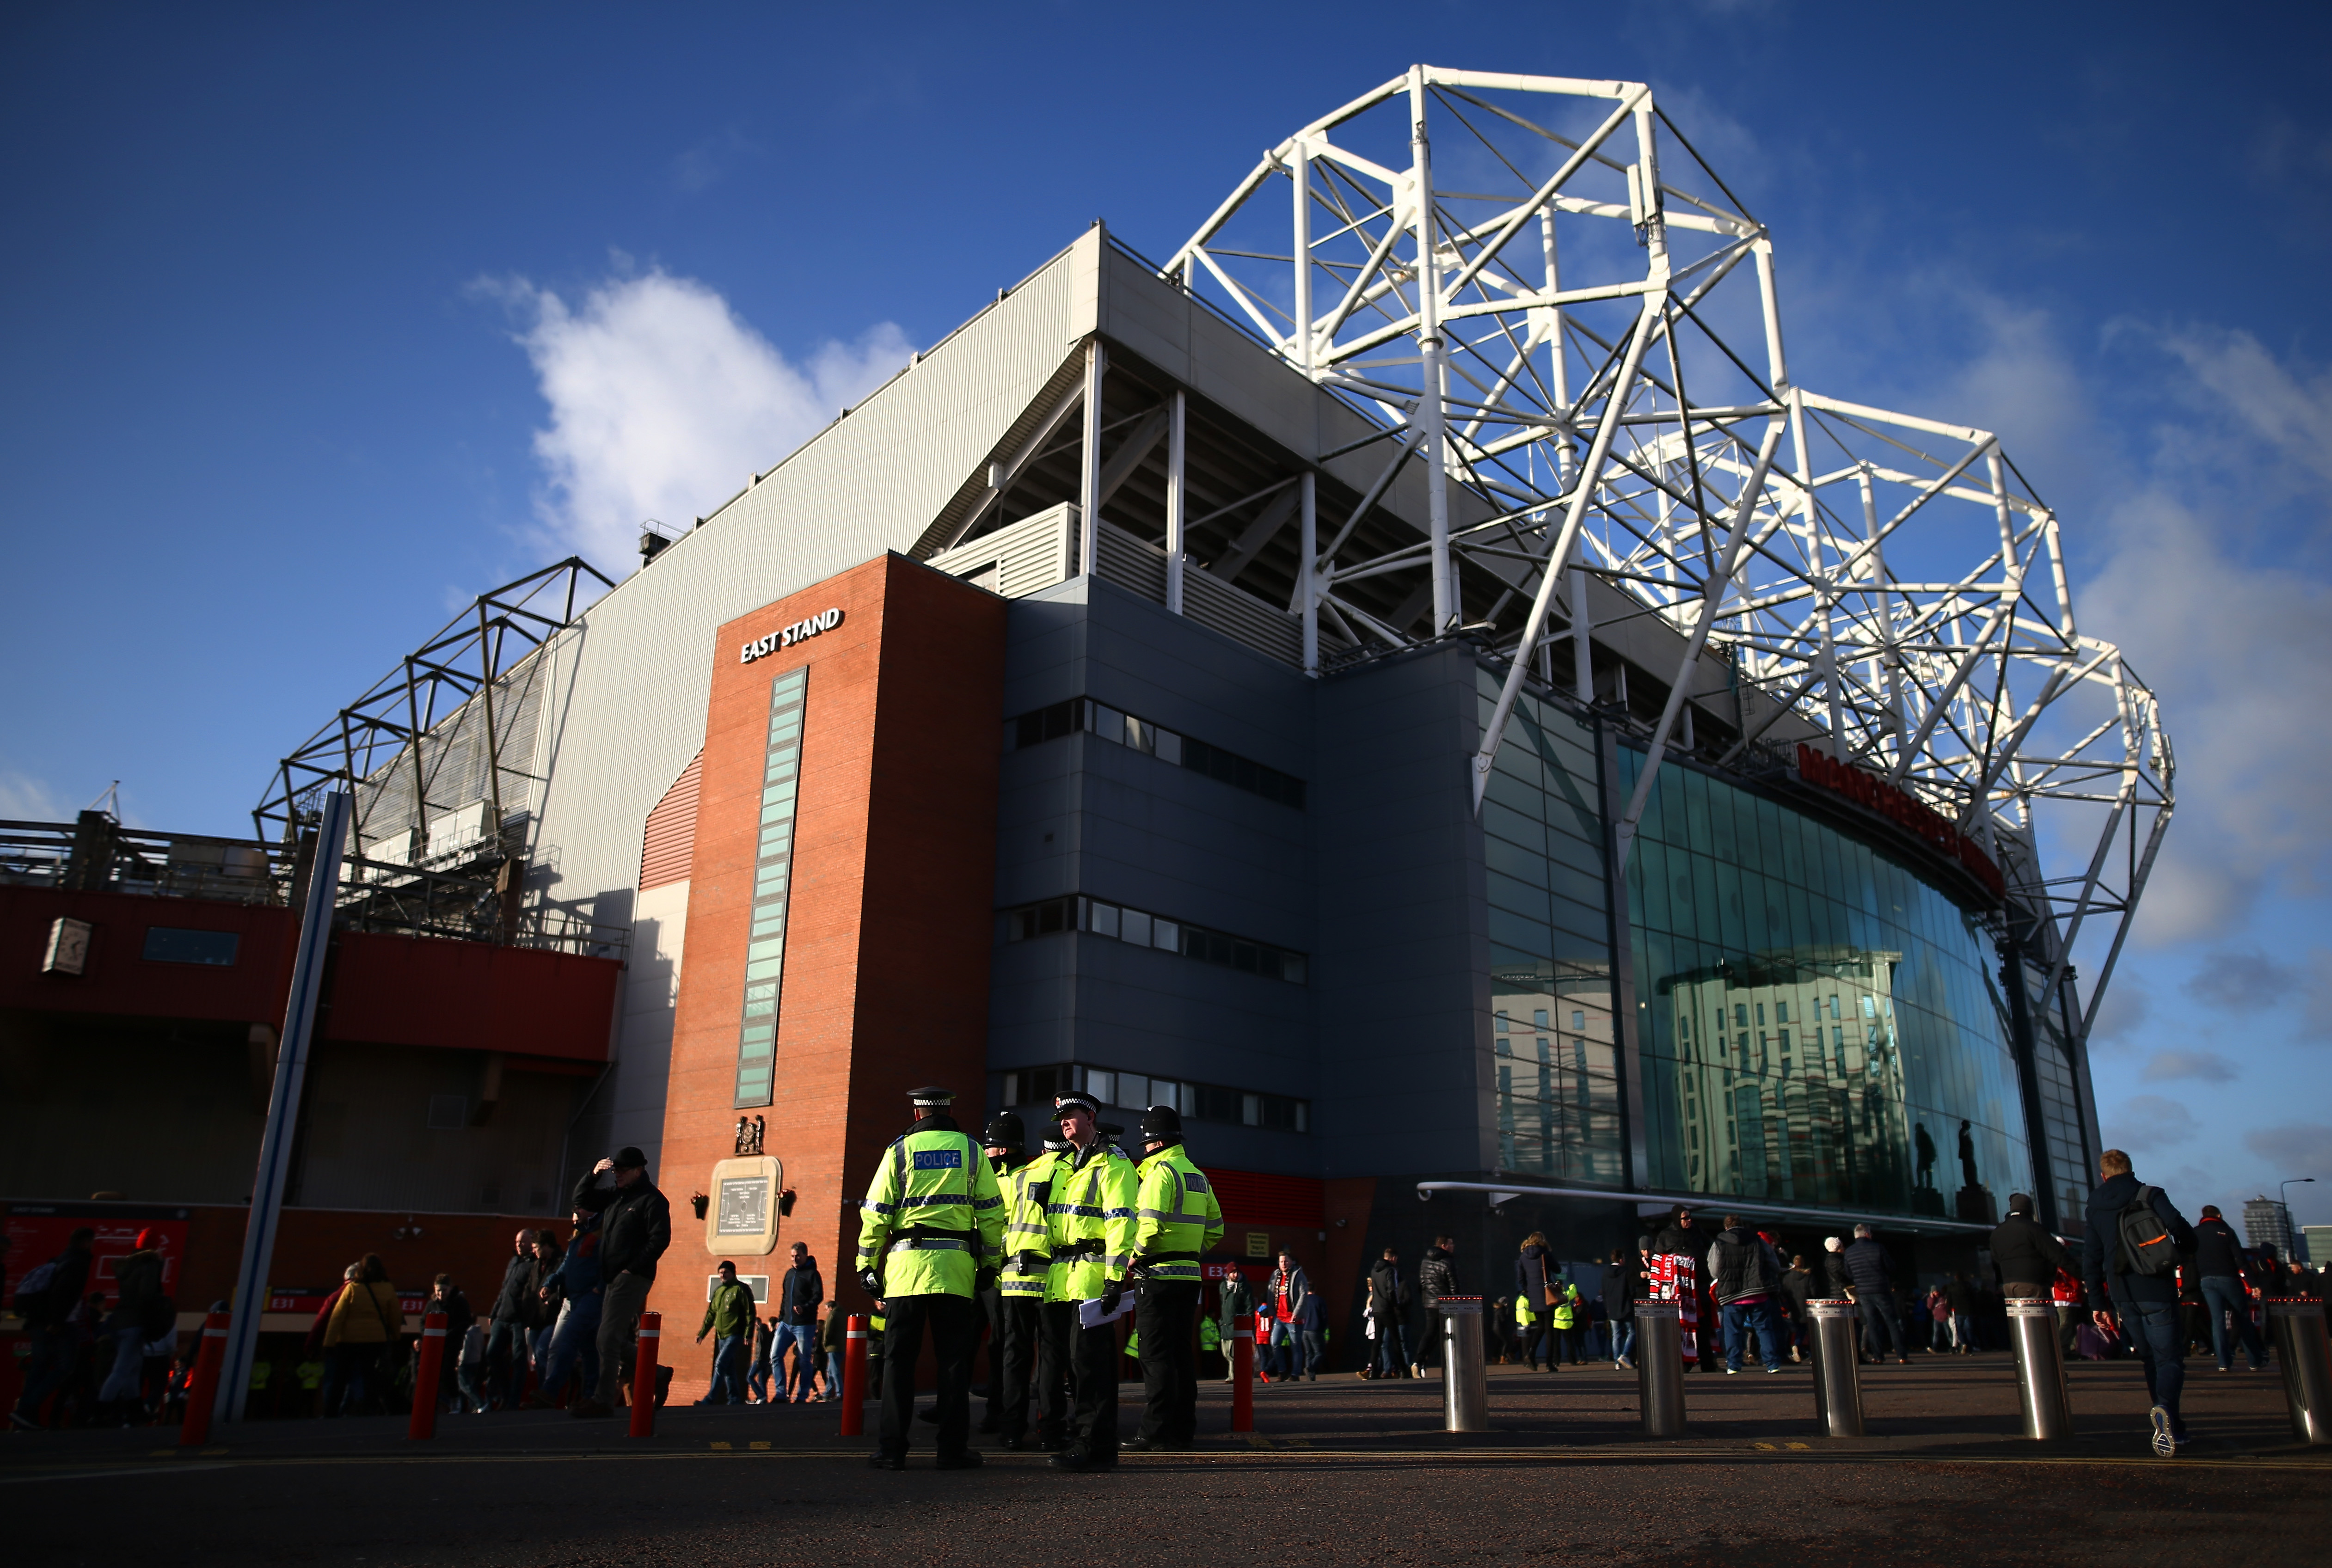 MANCHESTER, ENGLAND - DECEMBER 26:  A general view of the satadium exterior prior to kickoff during the Premier League match between Manchester United and Sunderland at Old Trafford on December 26, 2016 in Manchester, England.  (Photo by Jan Kruger/Getty Images)